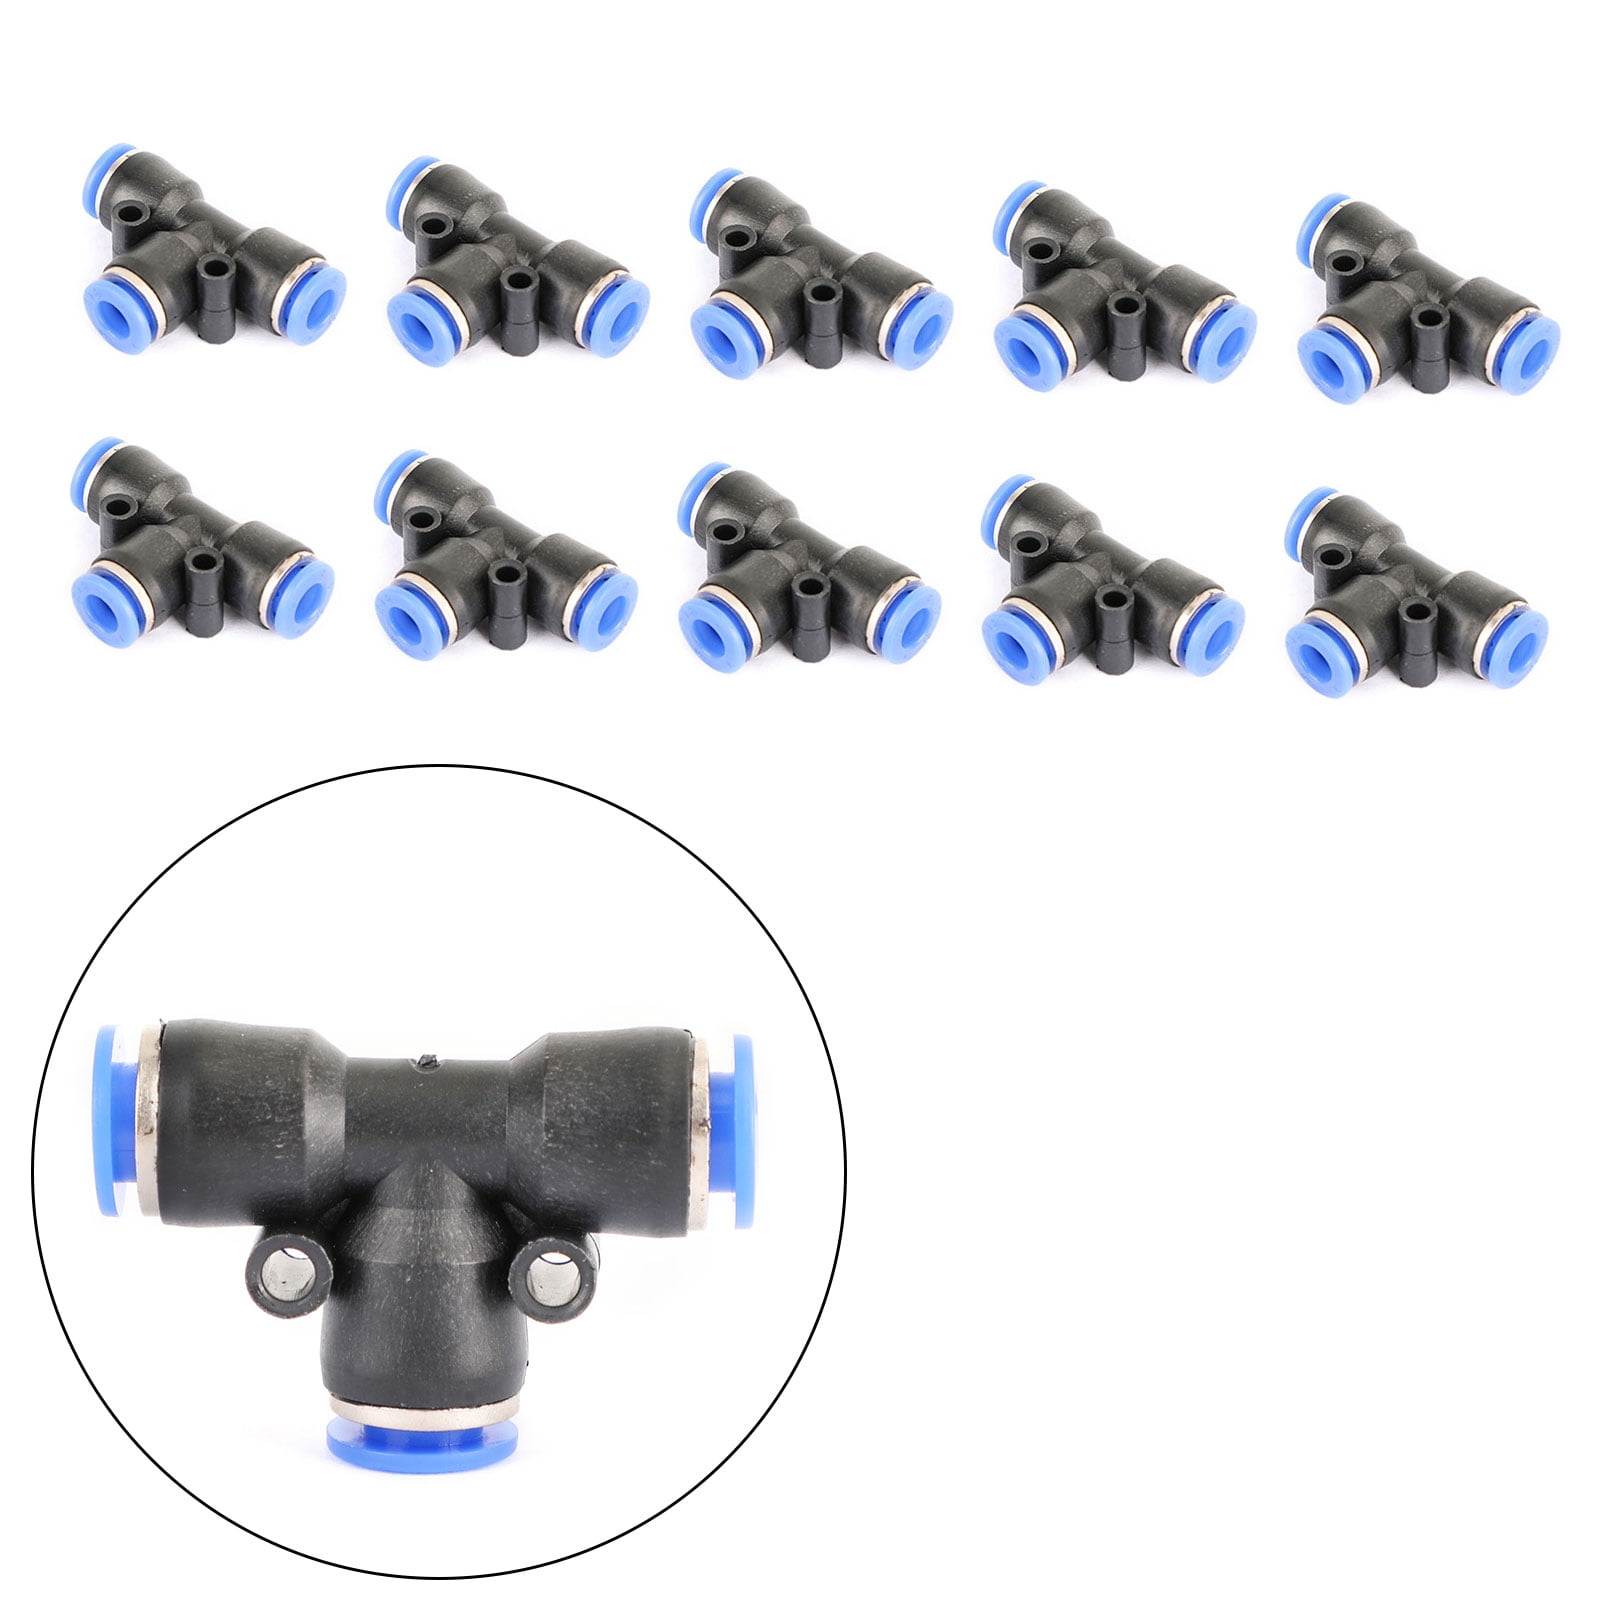 1/4Od Air Line Push To Connect Fittings Pneumatic Fittings Kit FREE SHIPPING 